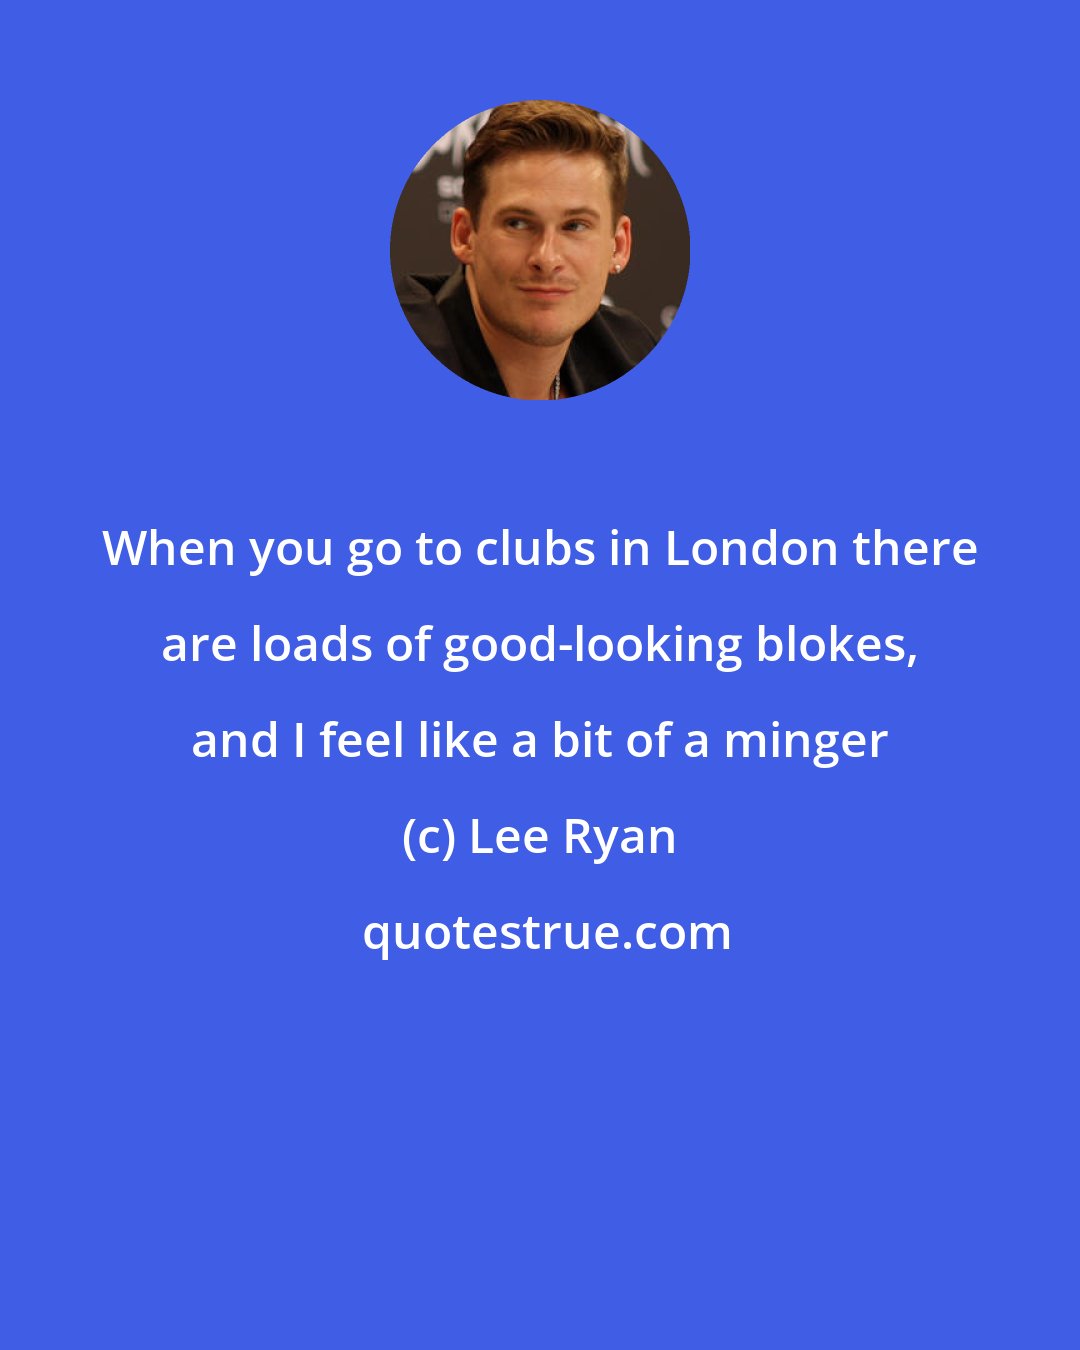 Lee Ryan: When you go to clubs in London there are loads of good-looking blokes, and I feel like a bit of a minger